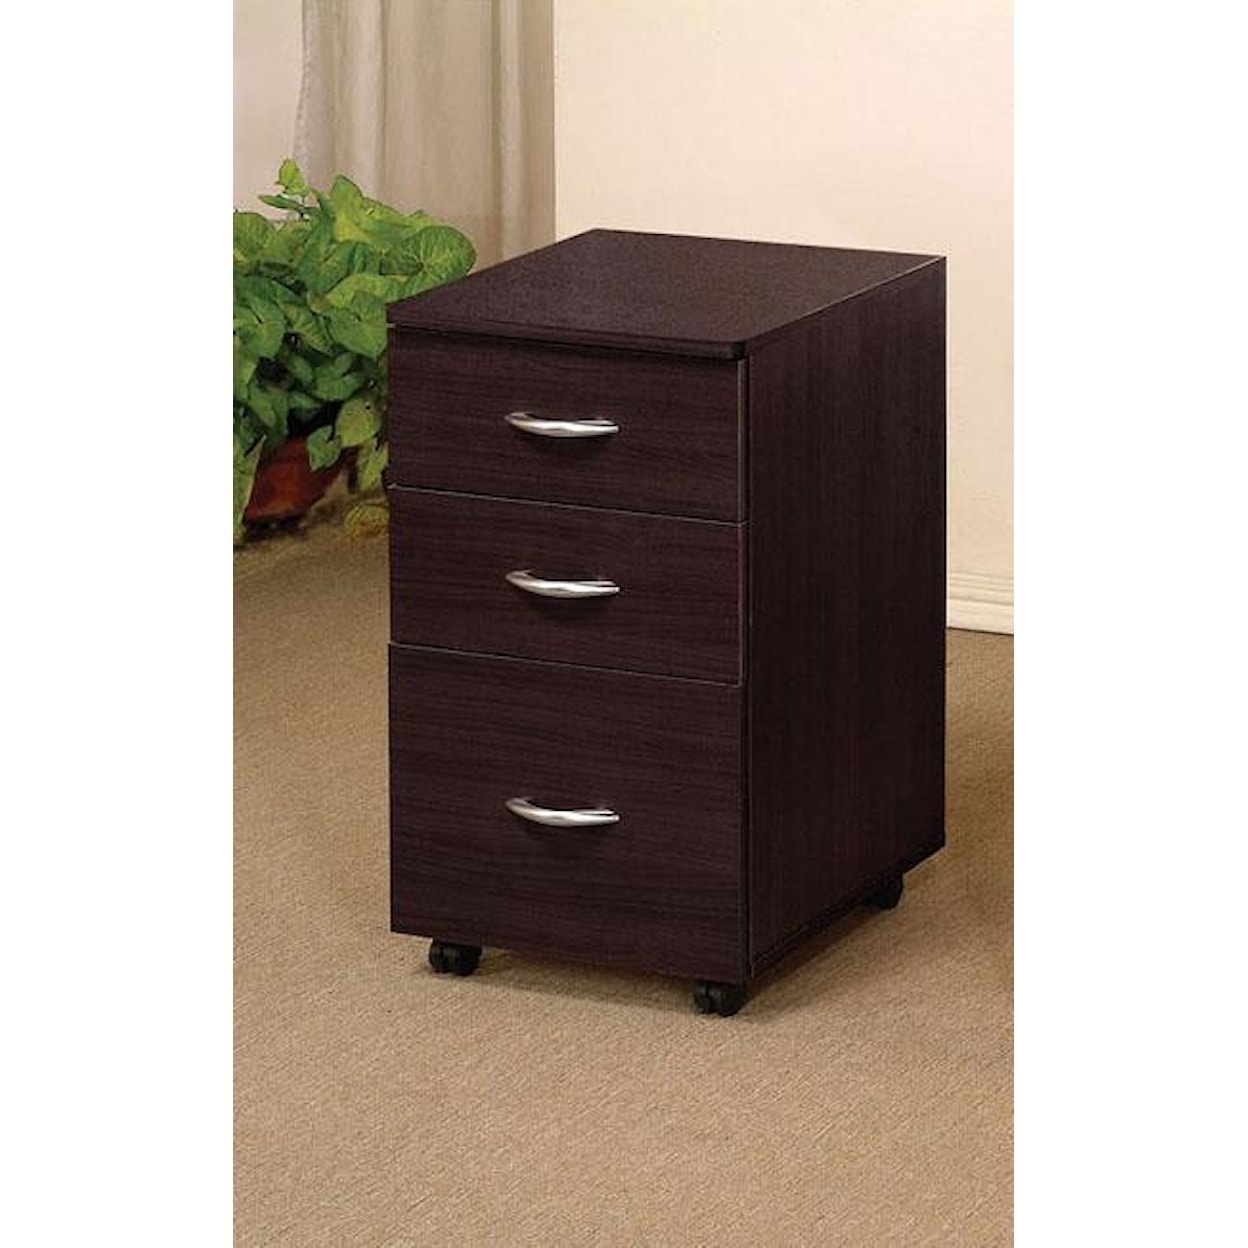 Acme Furniture Marlow File Cabinet